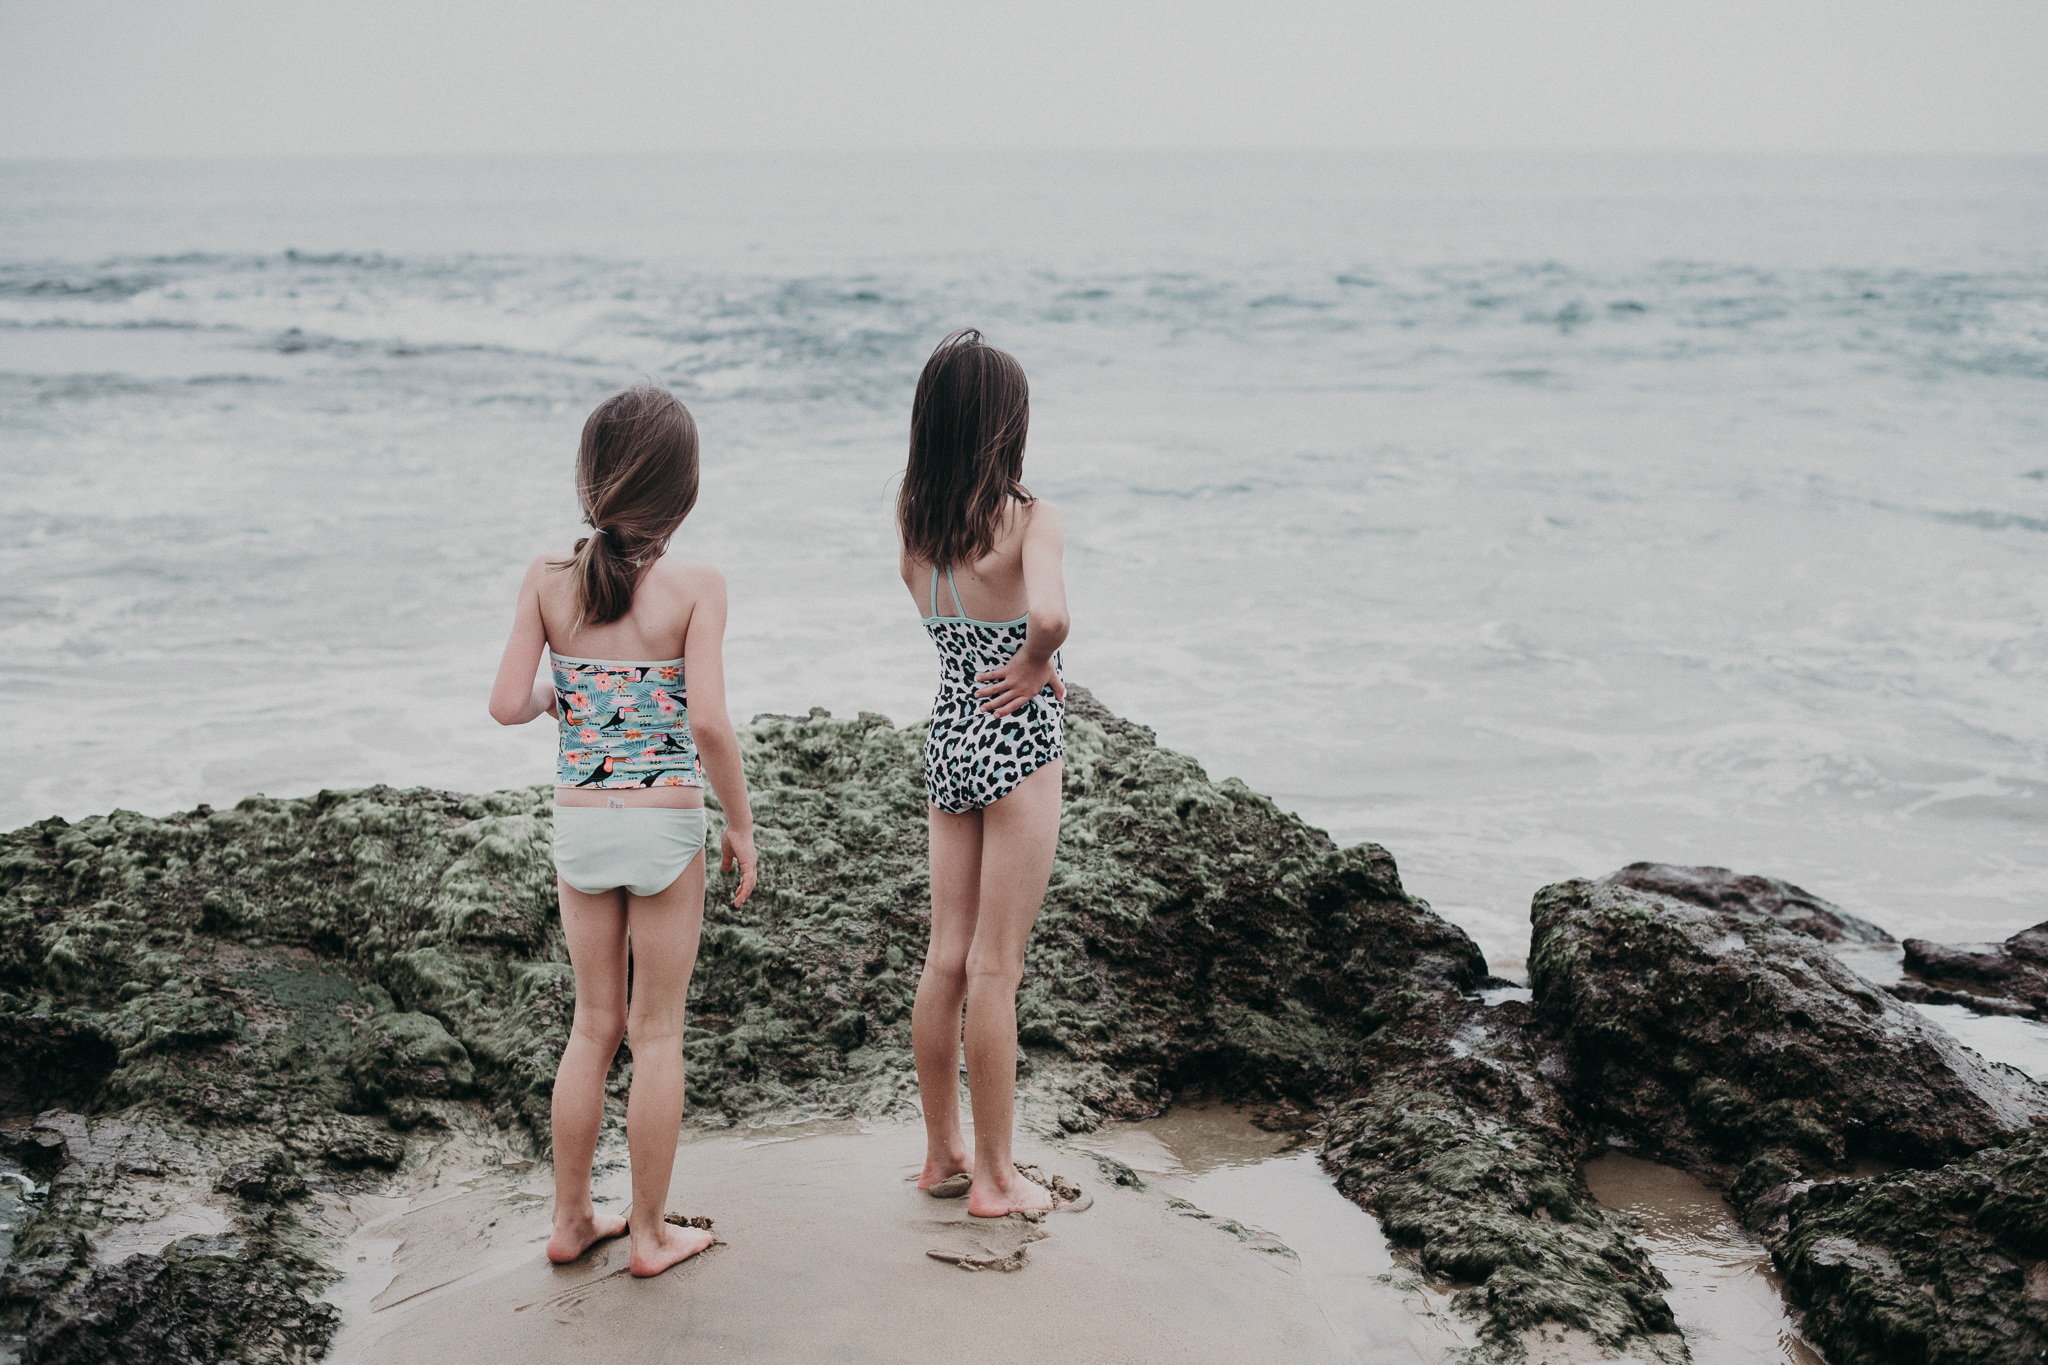 Girls walking along the beach looking out at the water